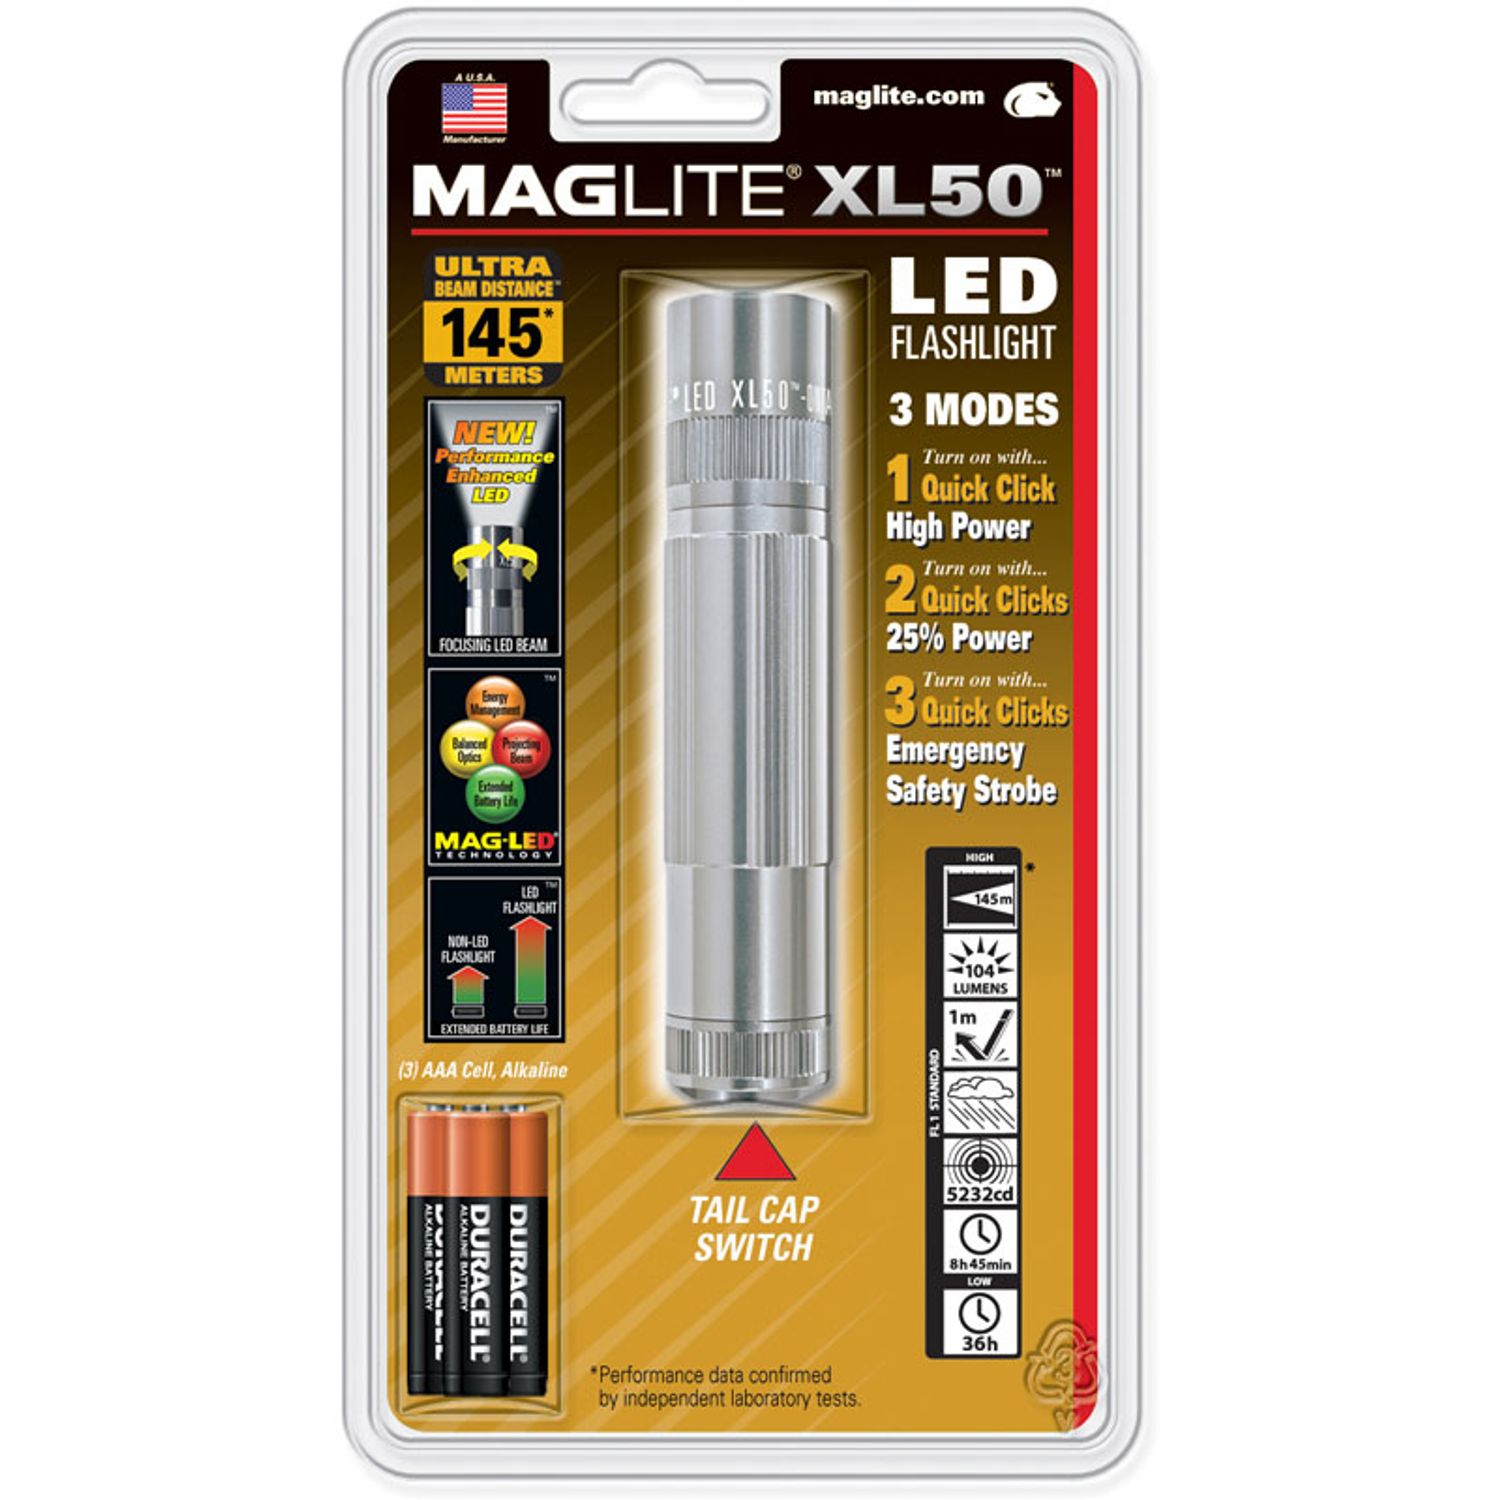 Maglite XL50 LED Flashlight, Silver, 3 Selectable Modes, 104 Max